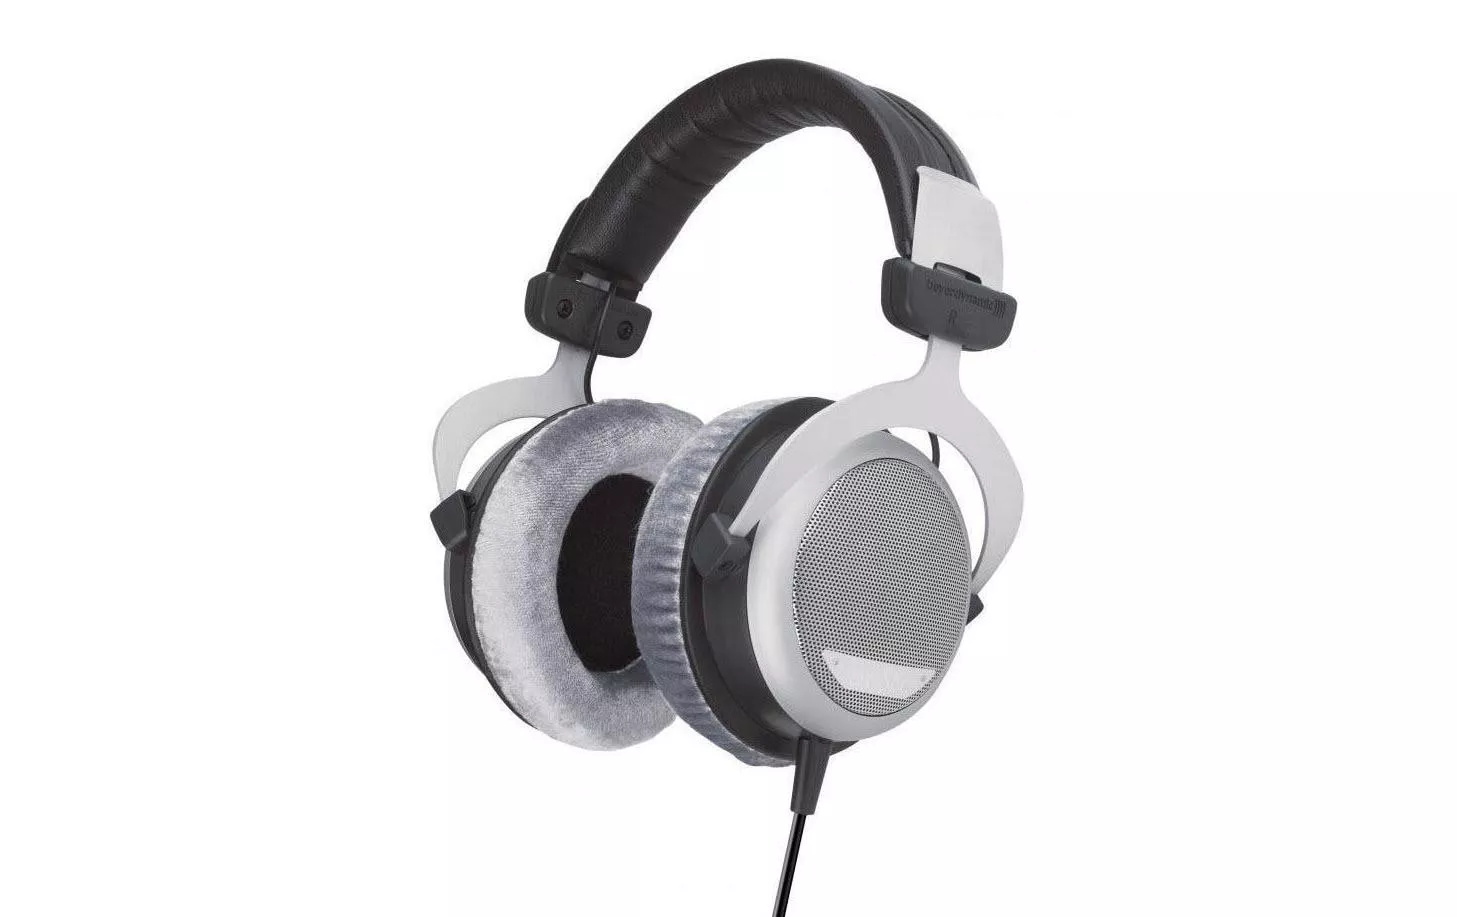 DT 880 Edition 250 Ω Cuffie over-ear, argento